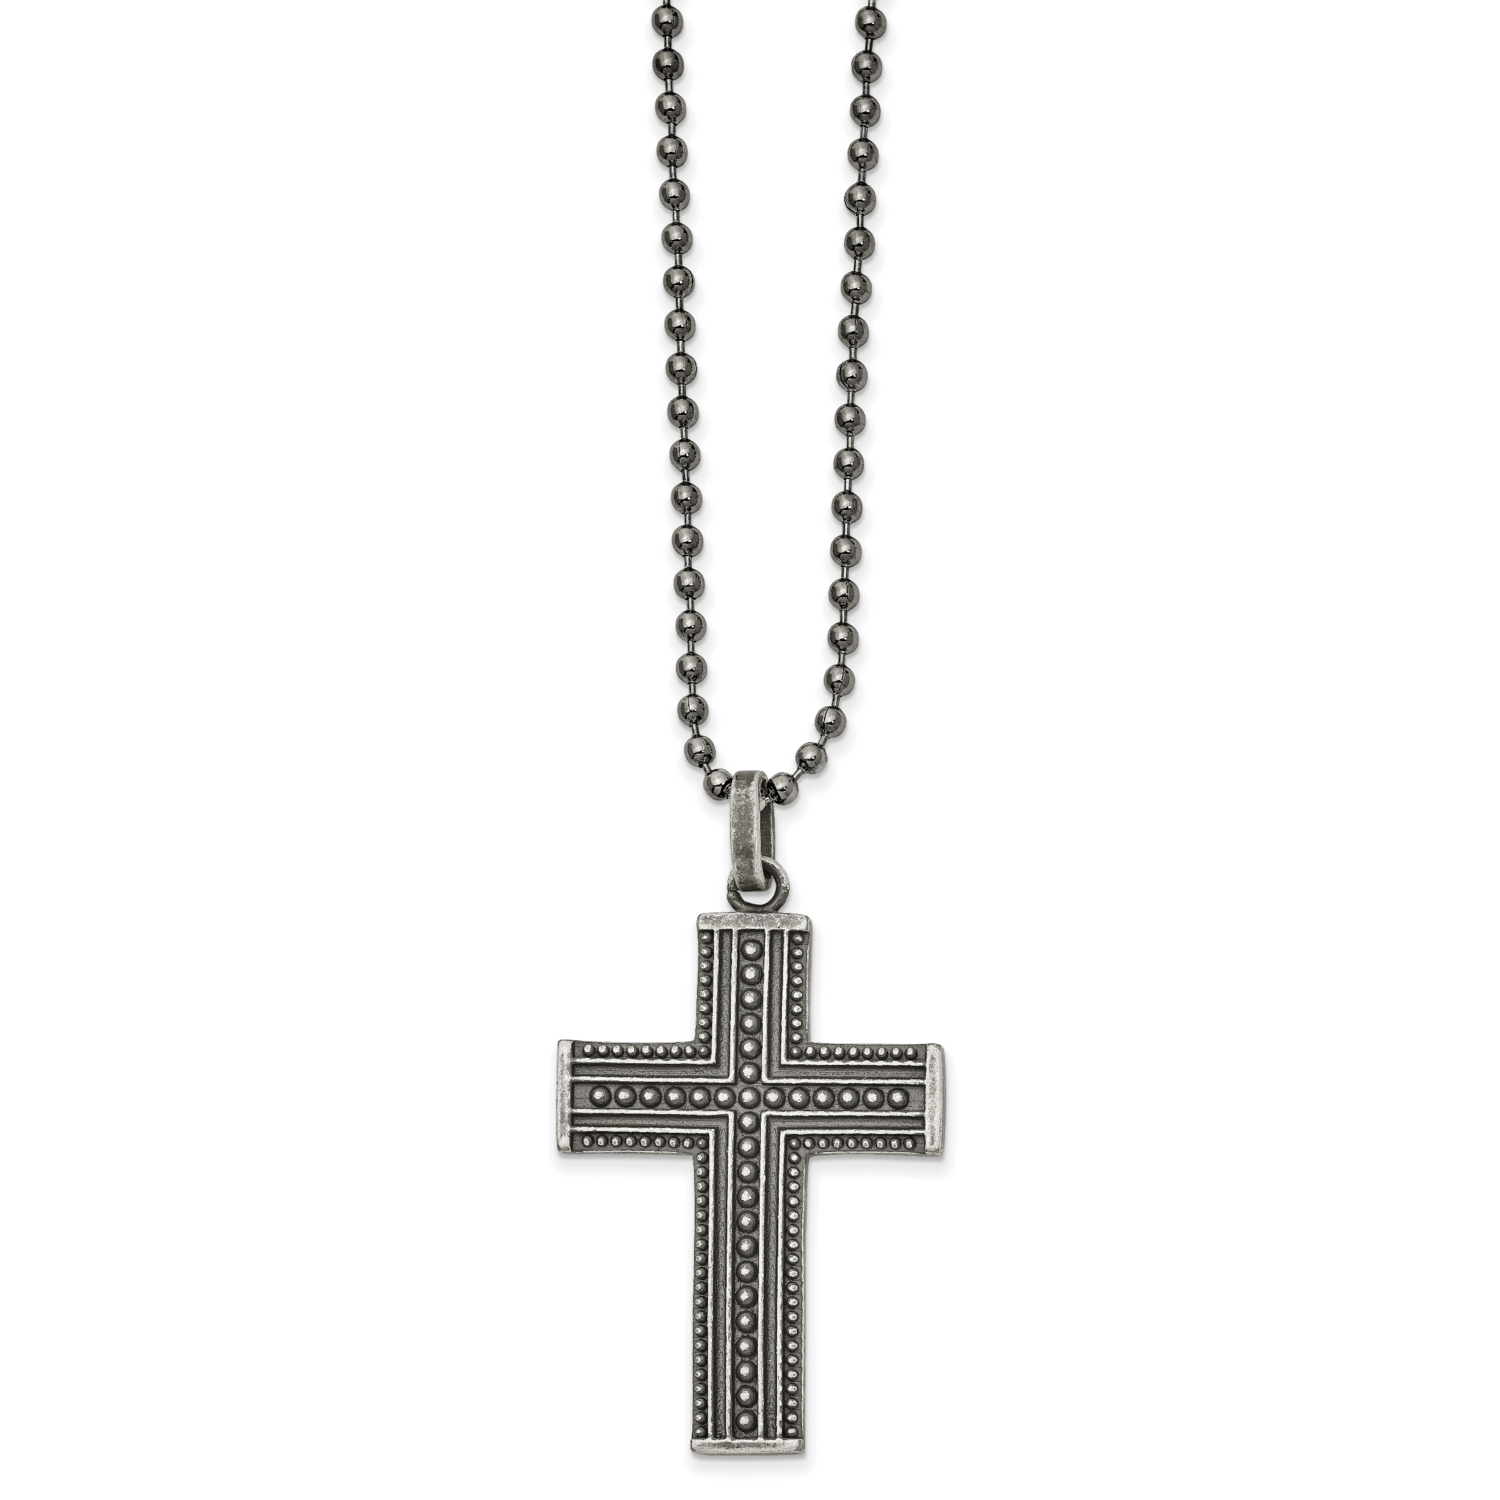 Polished GunMetal IP Cross 22 Inch Necklace Stainless Steel Antiqued SRN2603-22